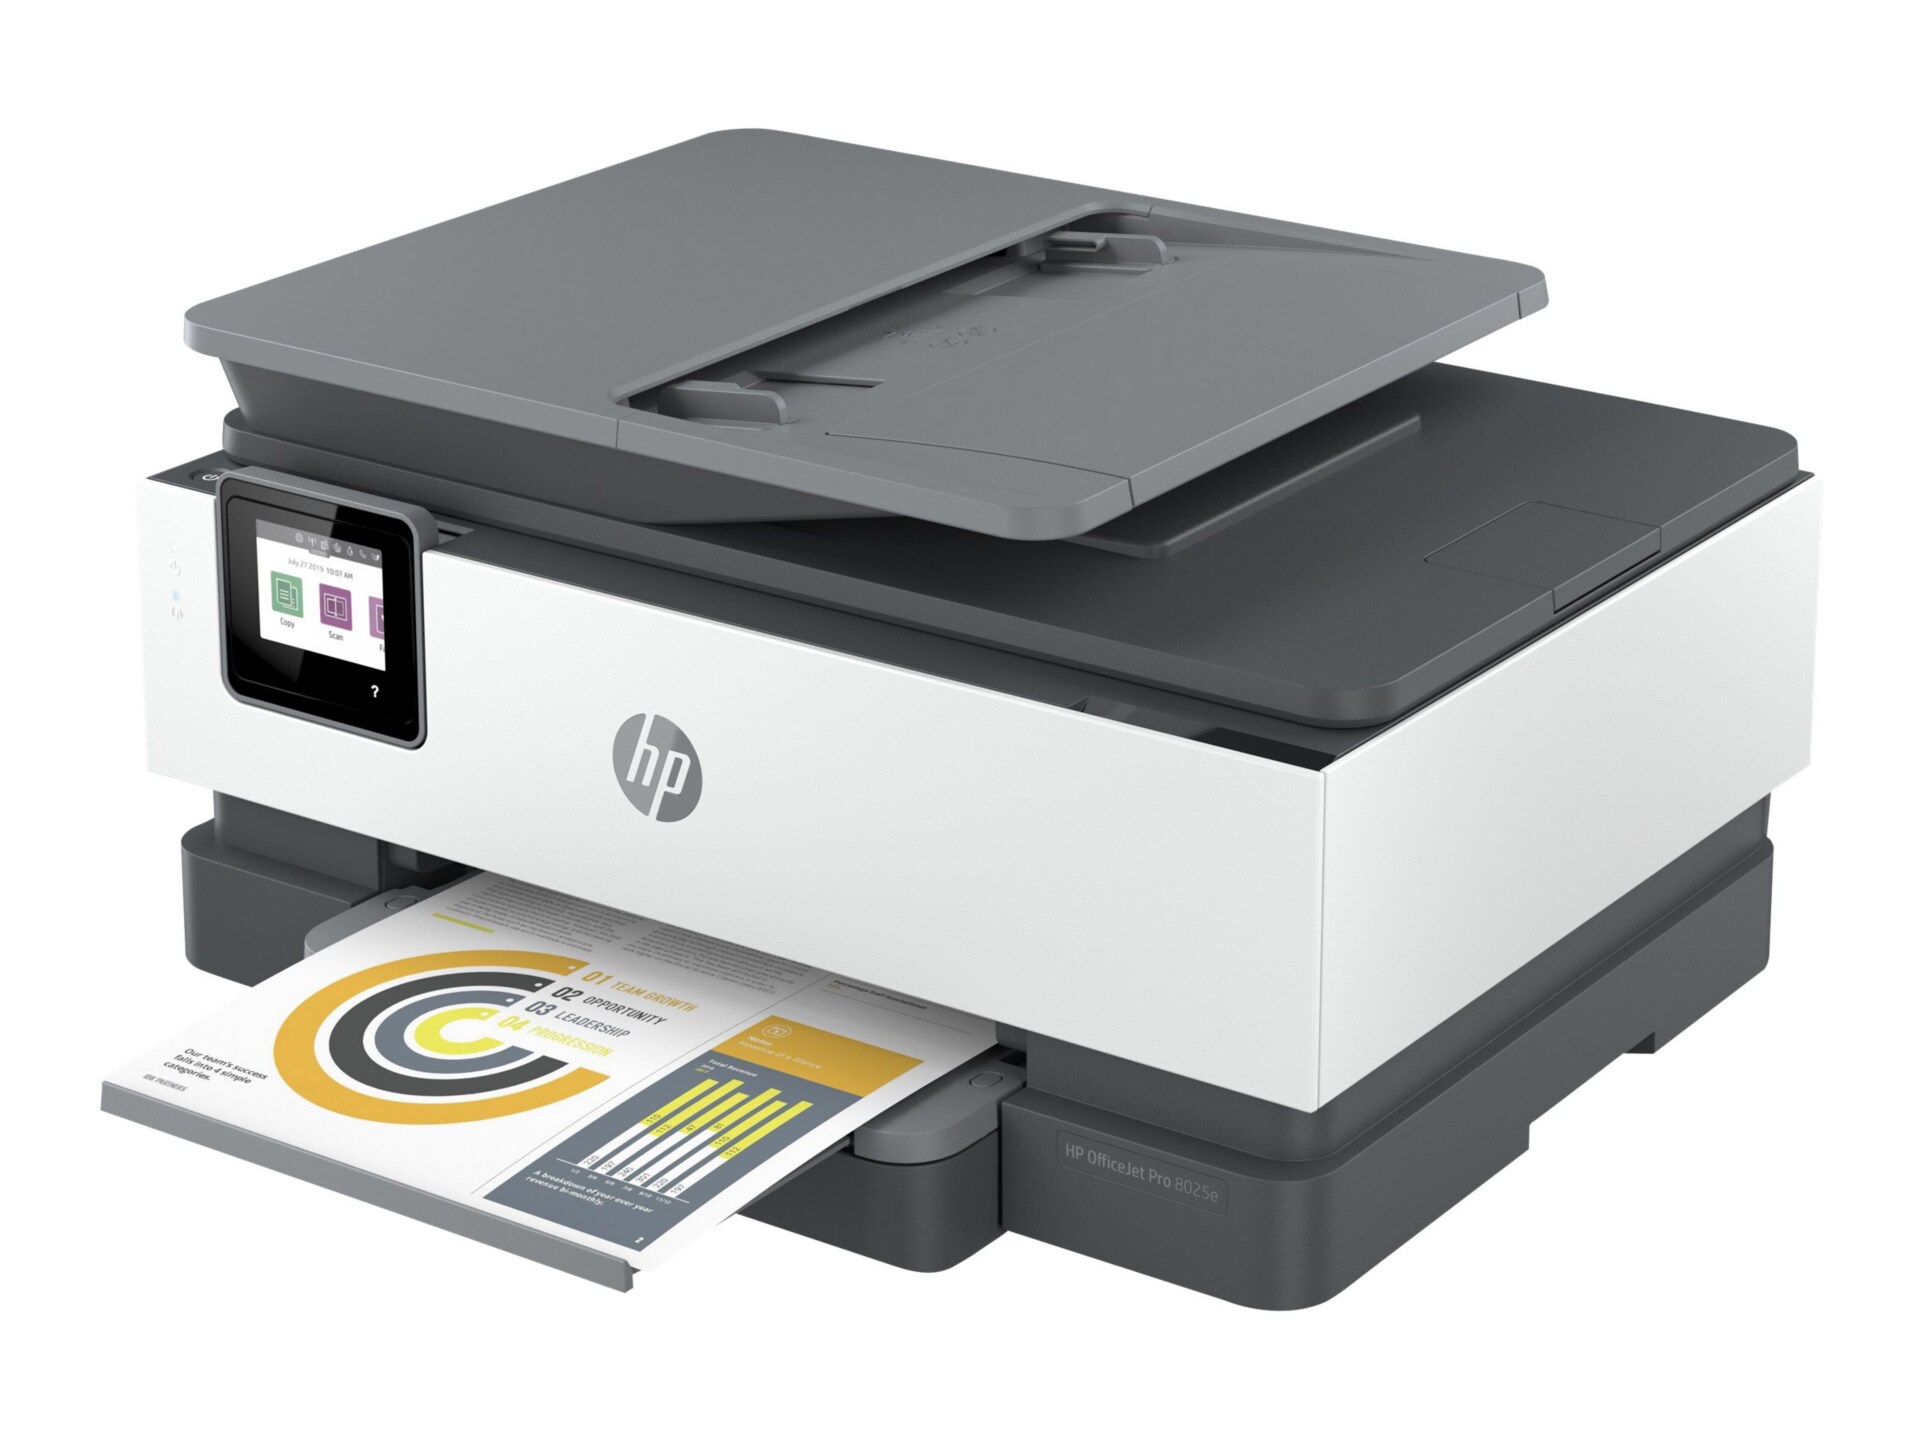 HP Officejet Pro 8025e All-in-One multifunction printer - - HP Instant Ink eligible - 1K7K3A#B1H - All-in-One Printers - CDW.com